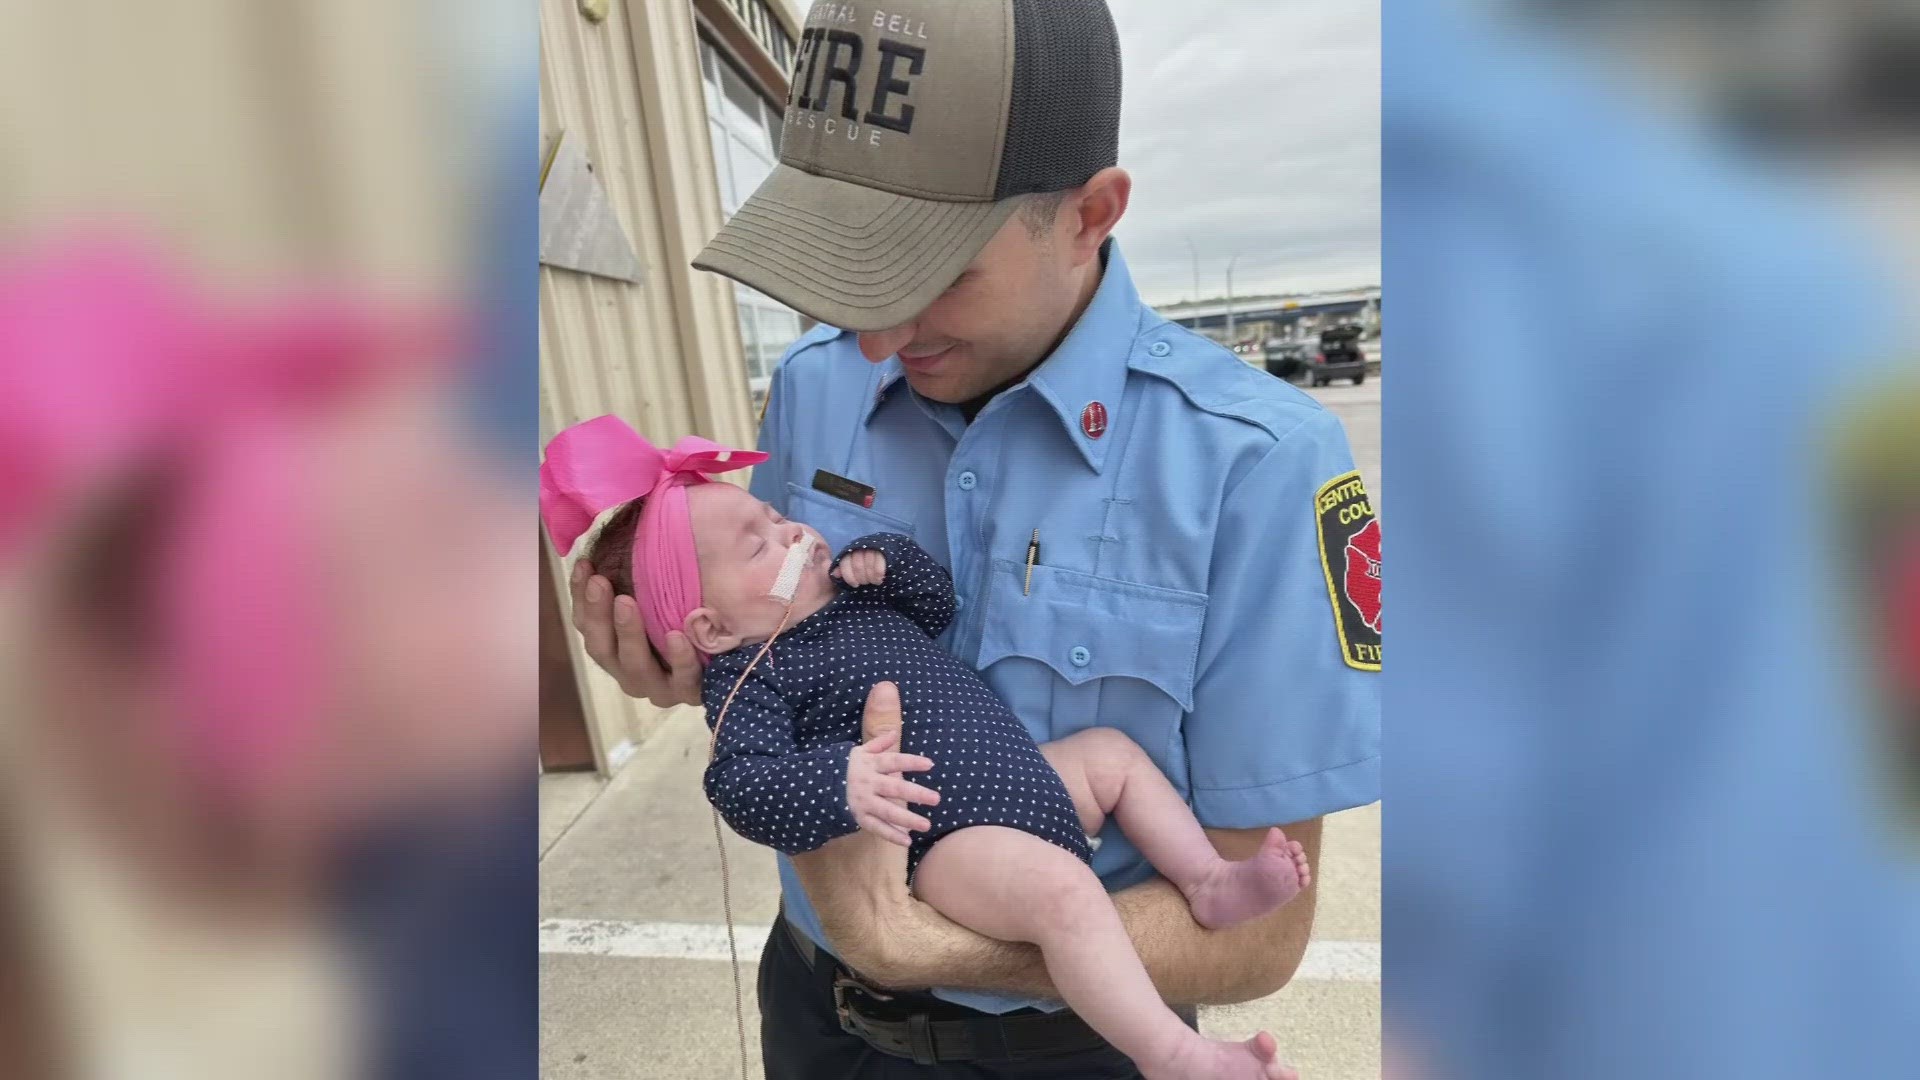 Members of Central Bell Fire and Rescue helped deliver two babies during a call. Months later, they were able to truly meet them.